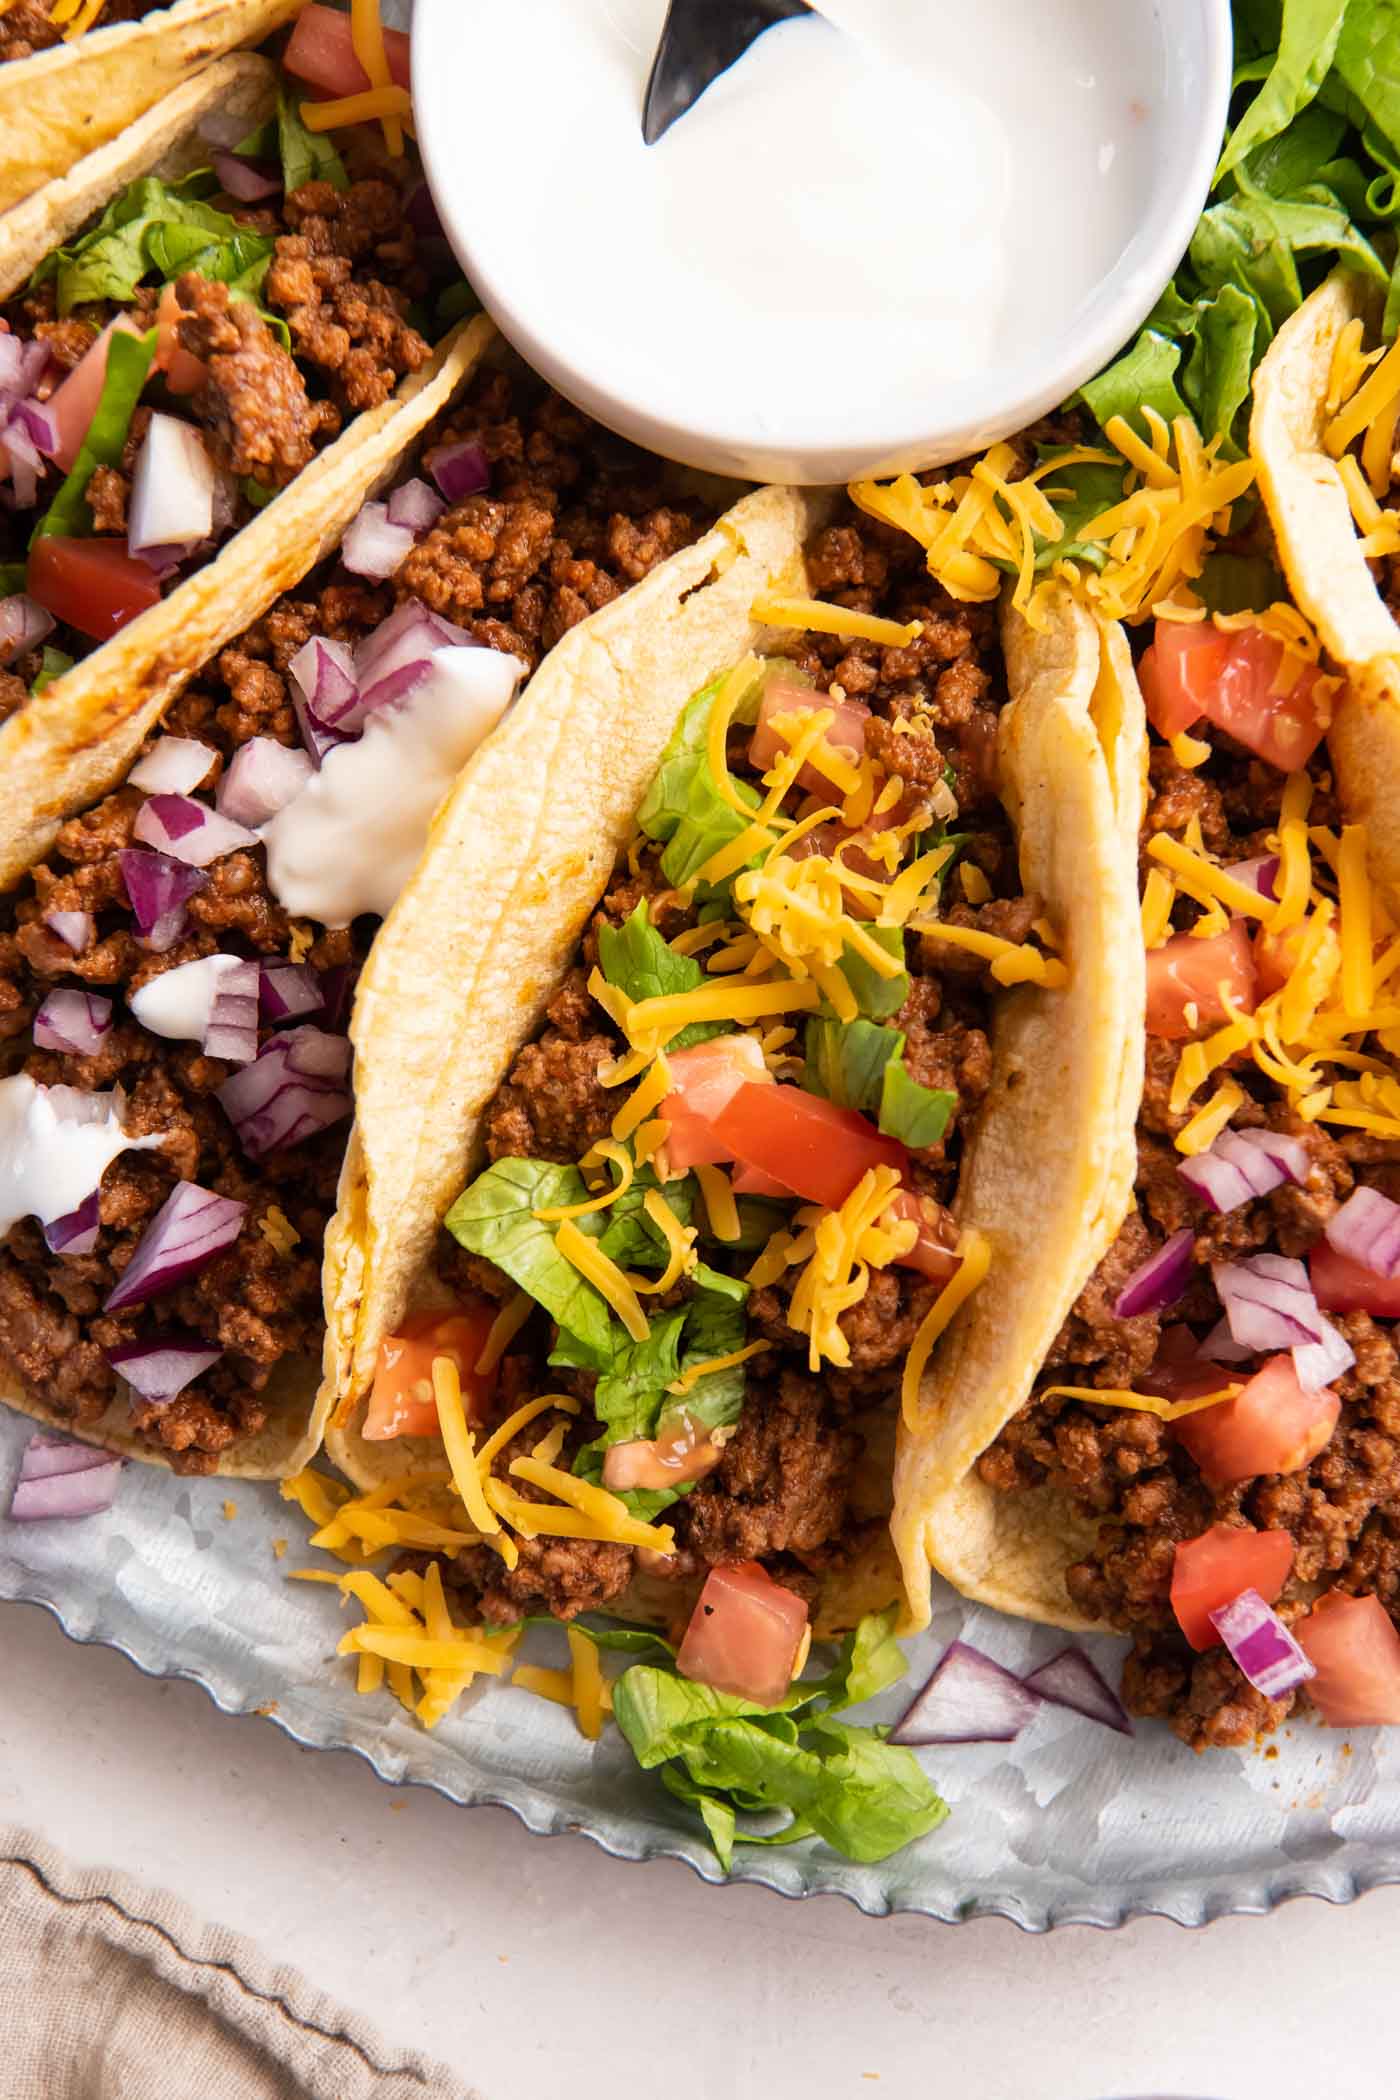 Ground beef tacos with a variety of toppings.